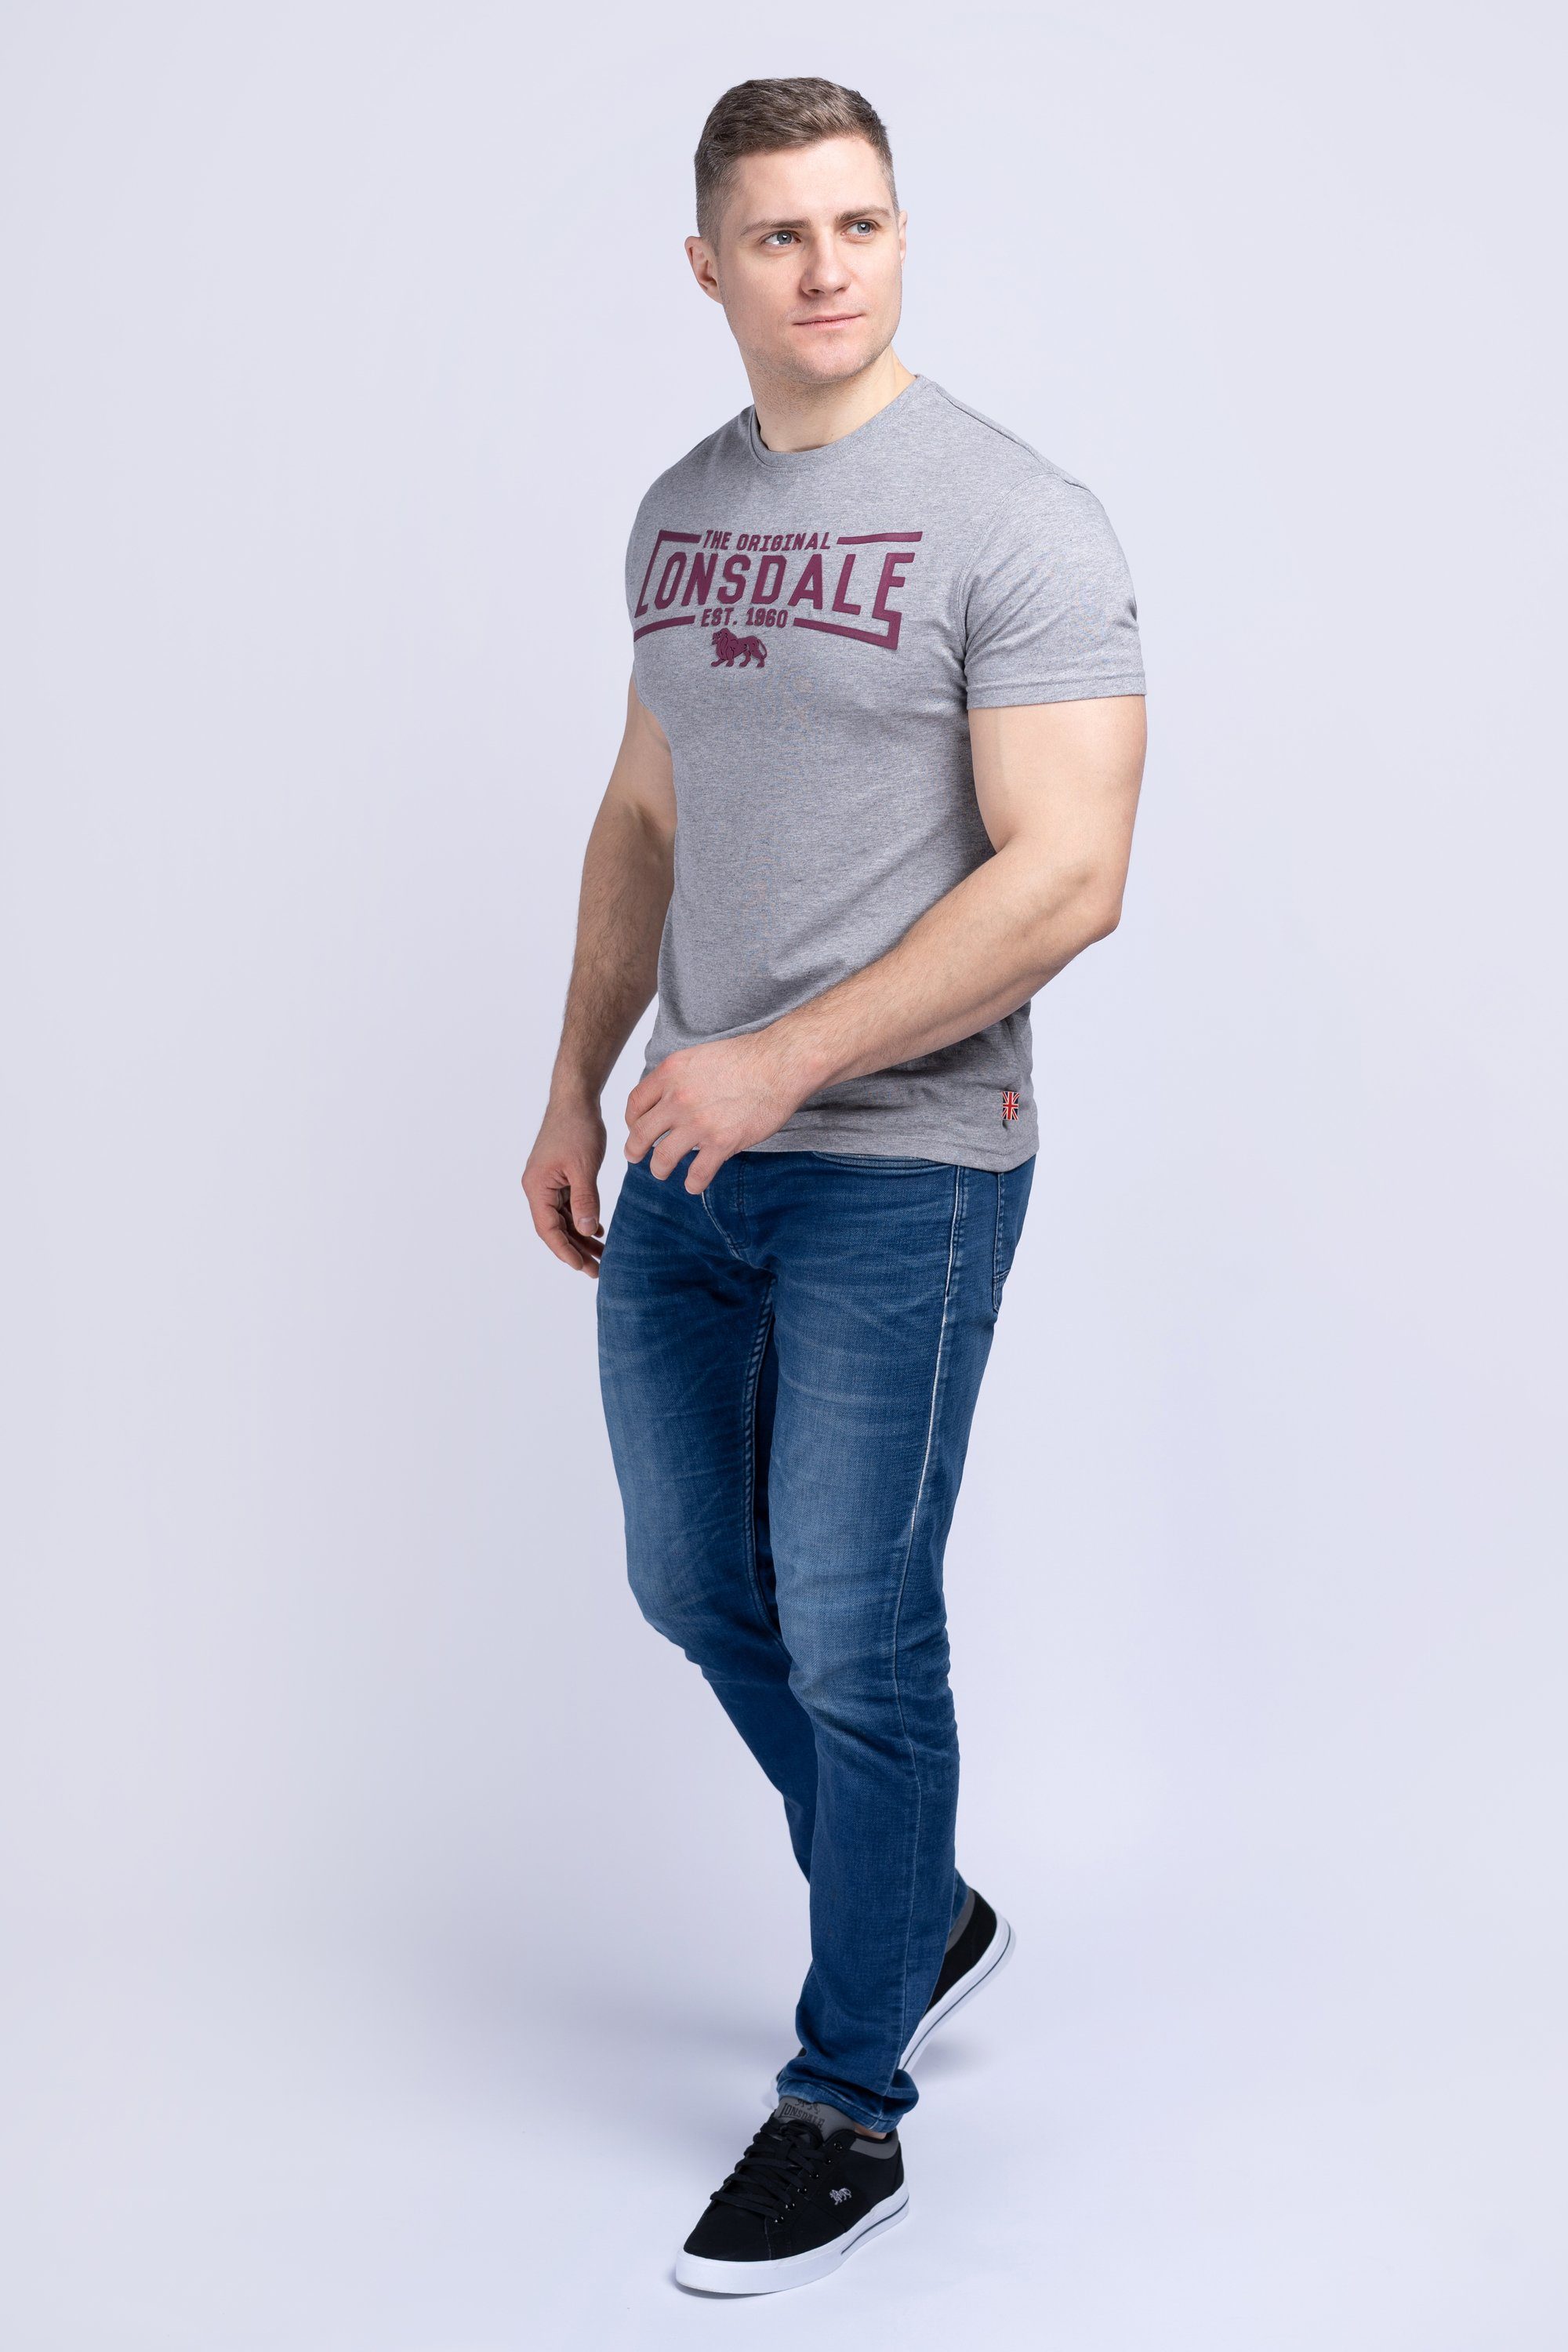 Marl T-Shirt NYBSTER Lonsdale Grey/Oxblood